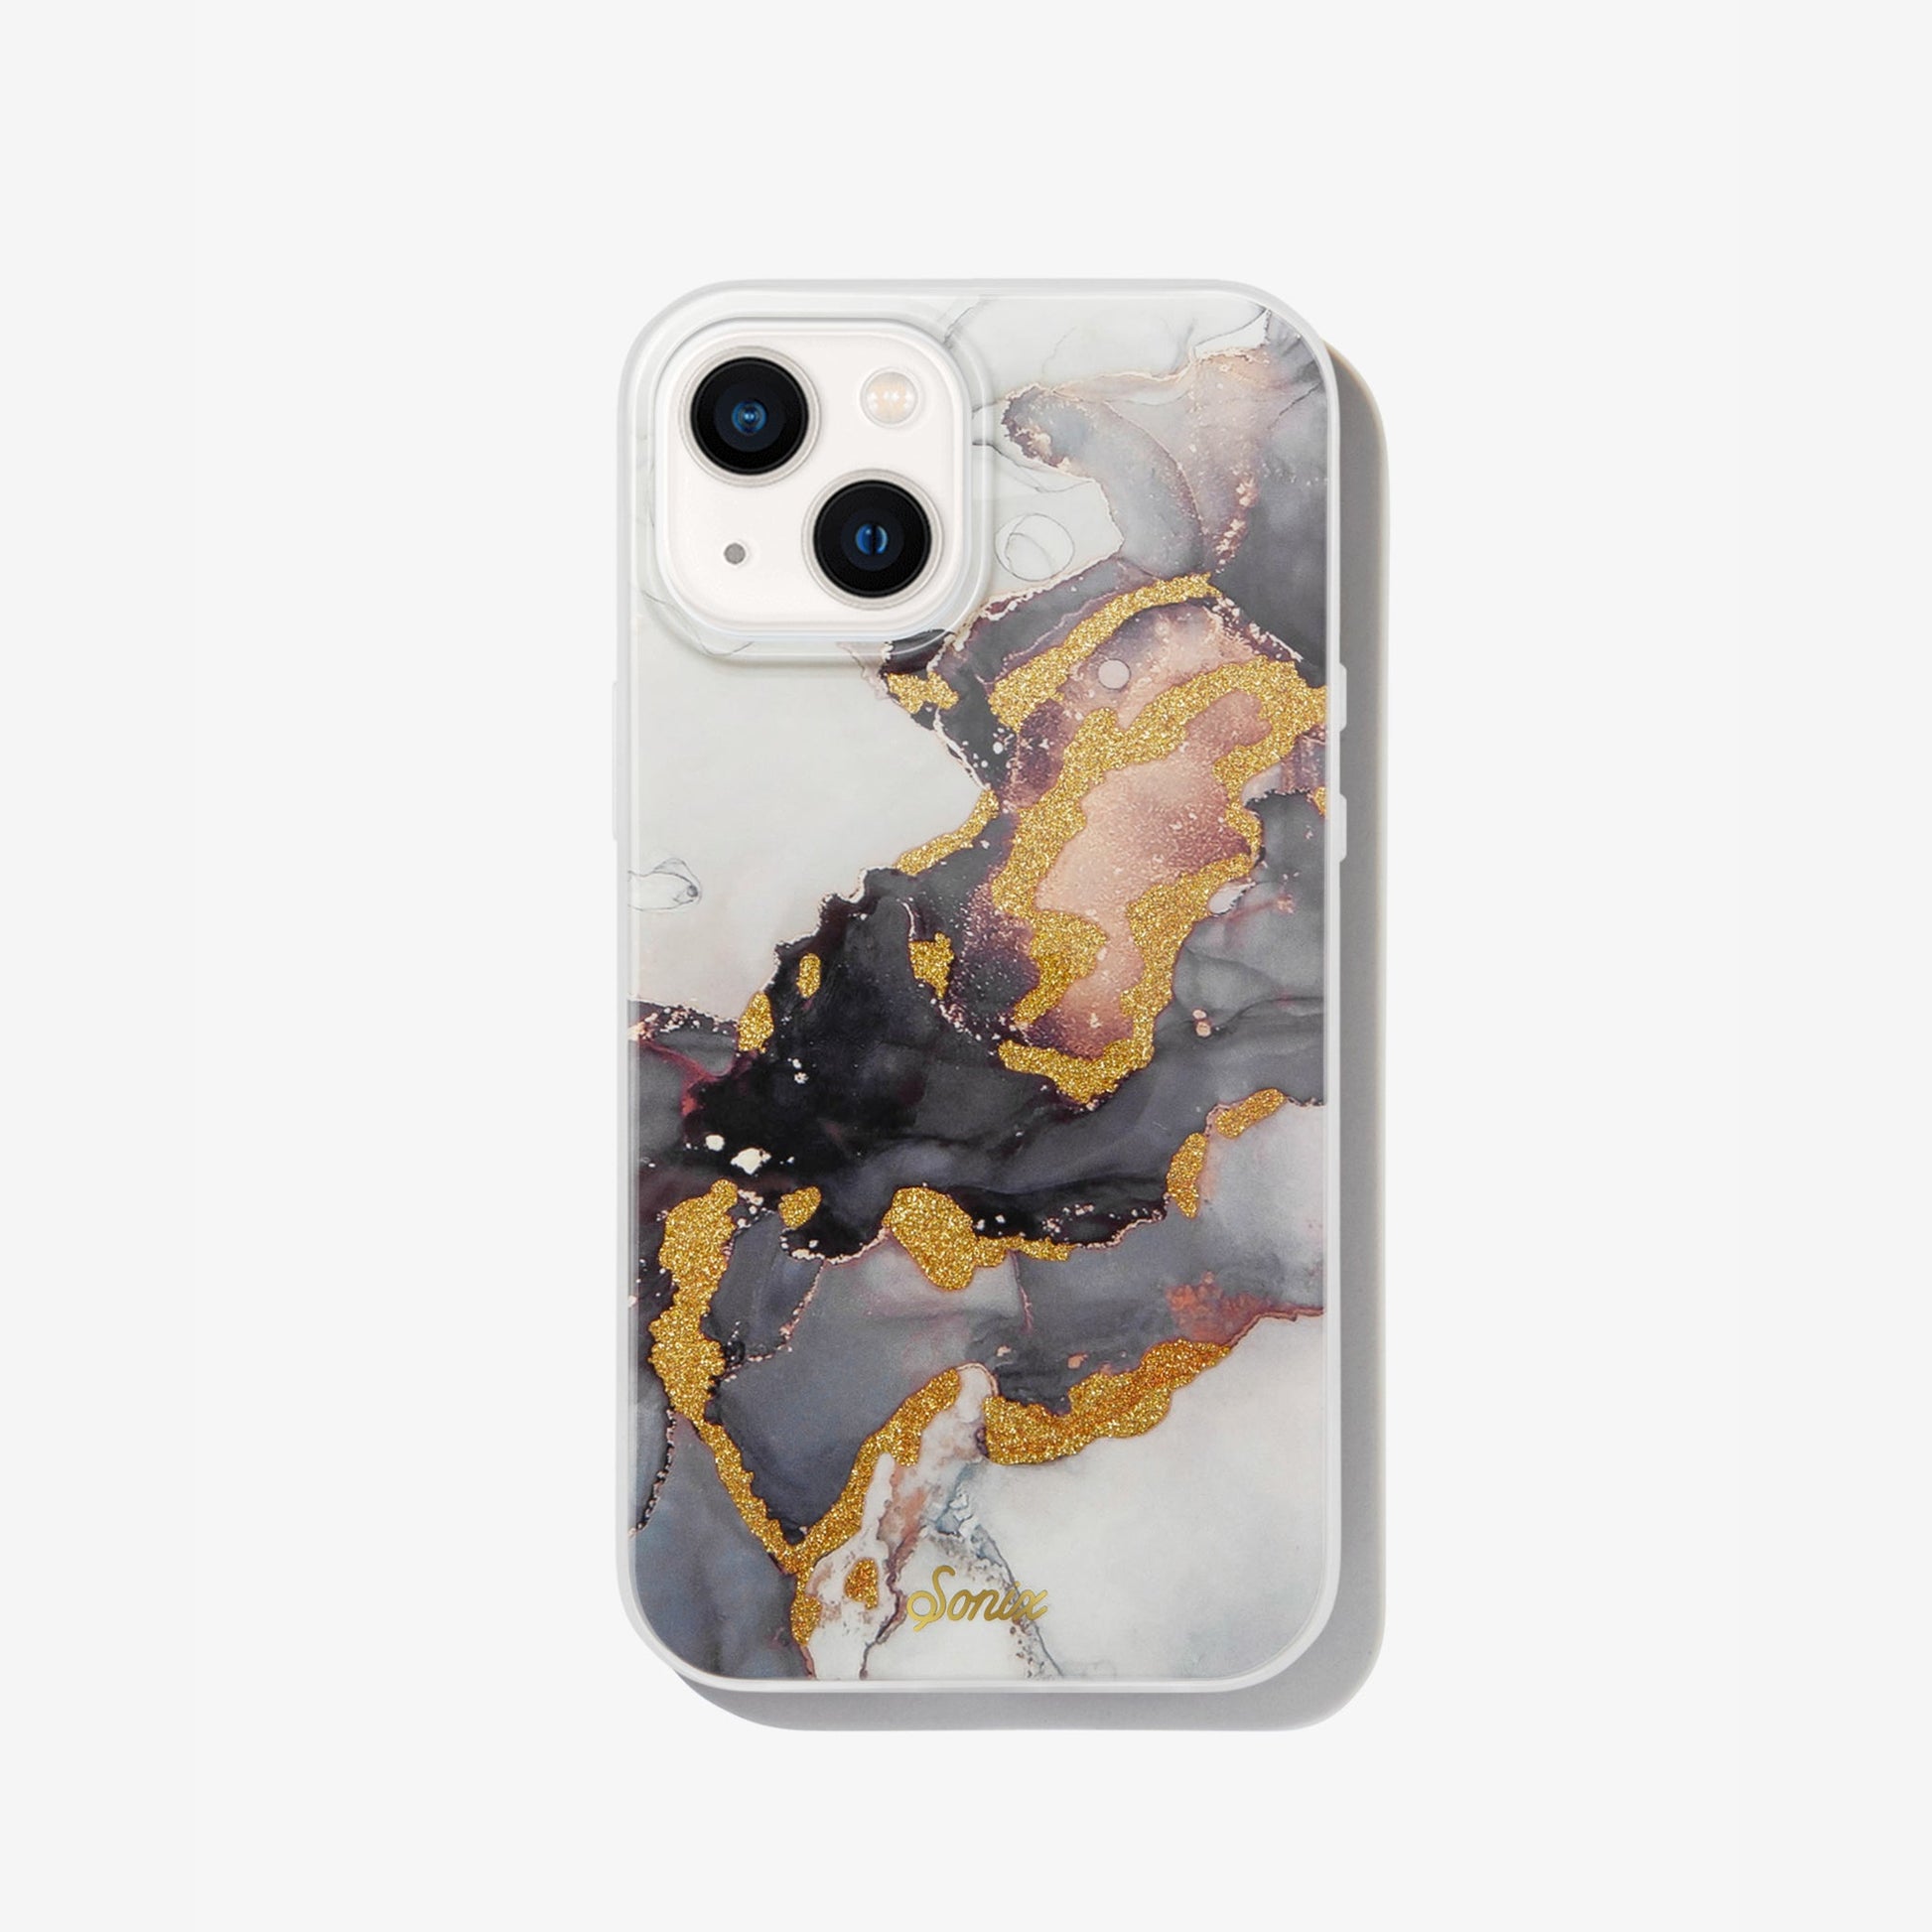 an intergalactic purple and dark colored design with gold glitter to bring out-of-this-world elements shown on an iphone 12 pro